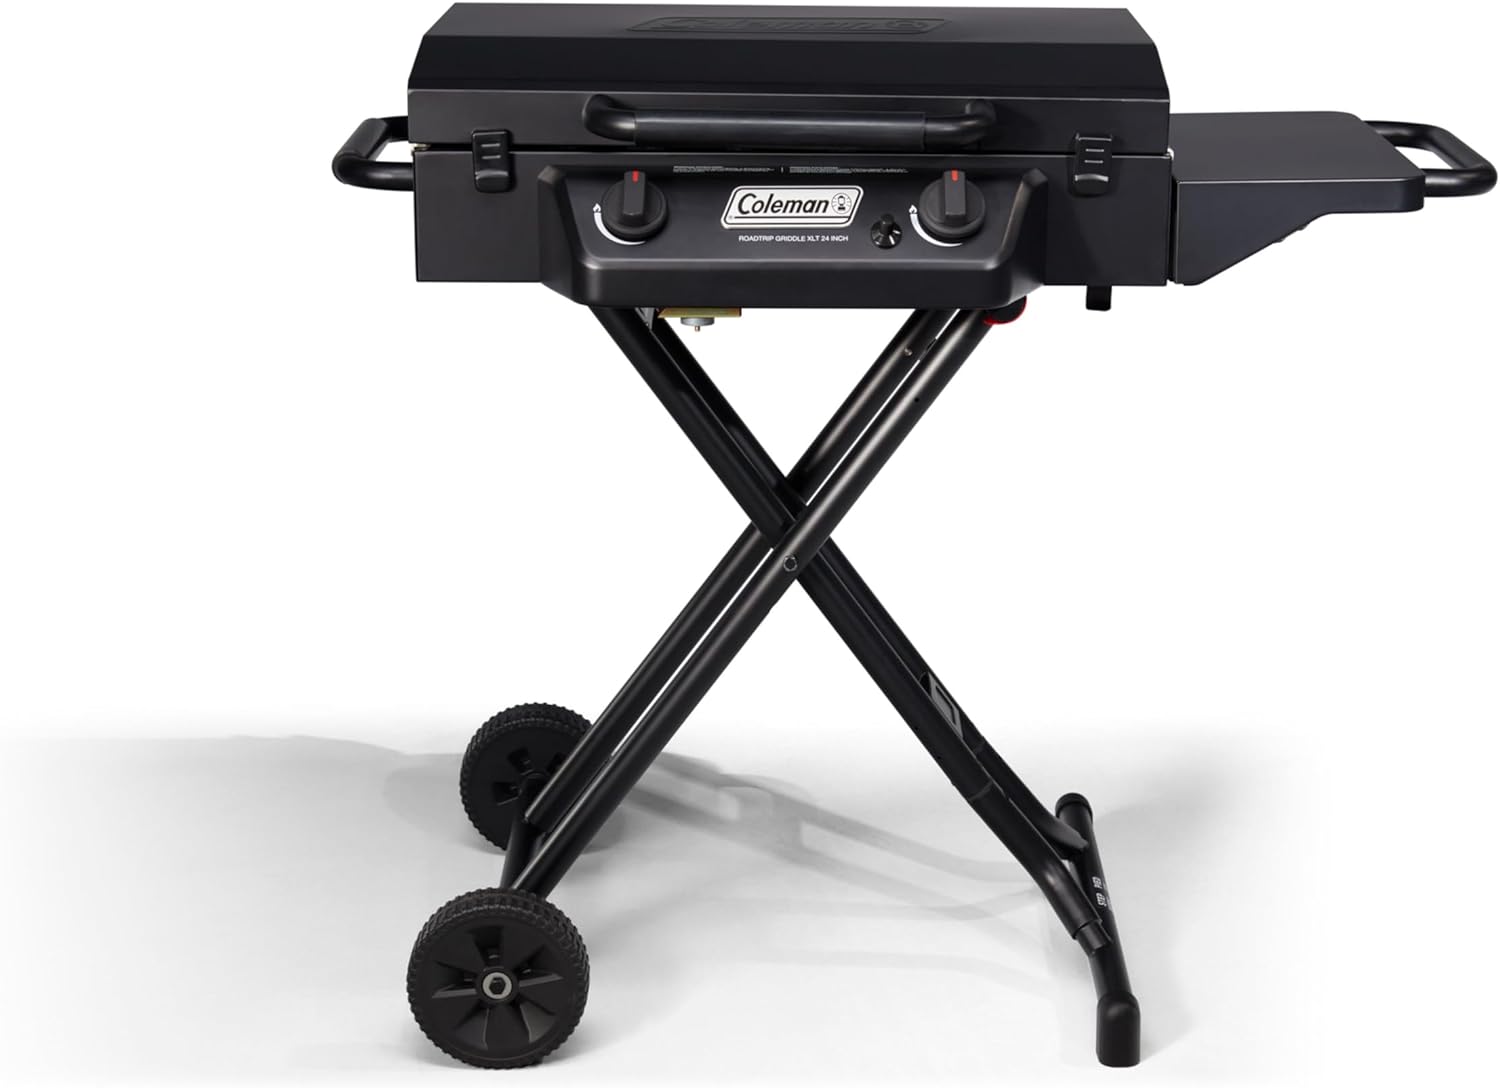 Review of Coleman RoadTrip Griddle, 19